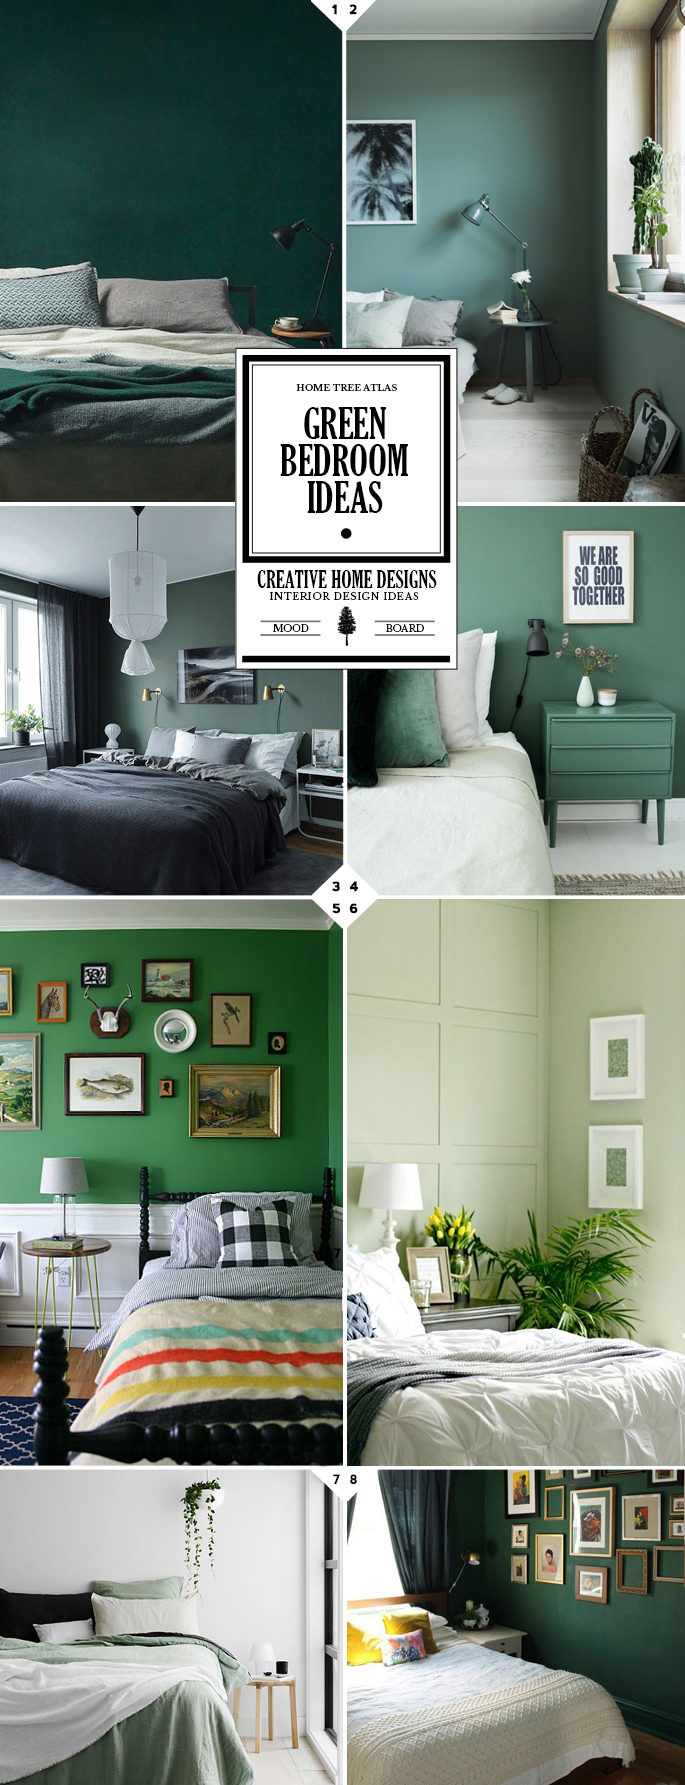 Style Guide: Green Bedroom Ideas